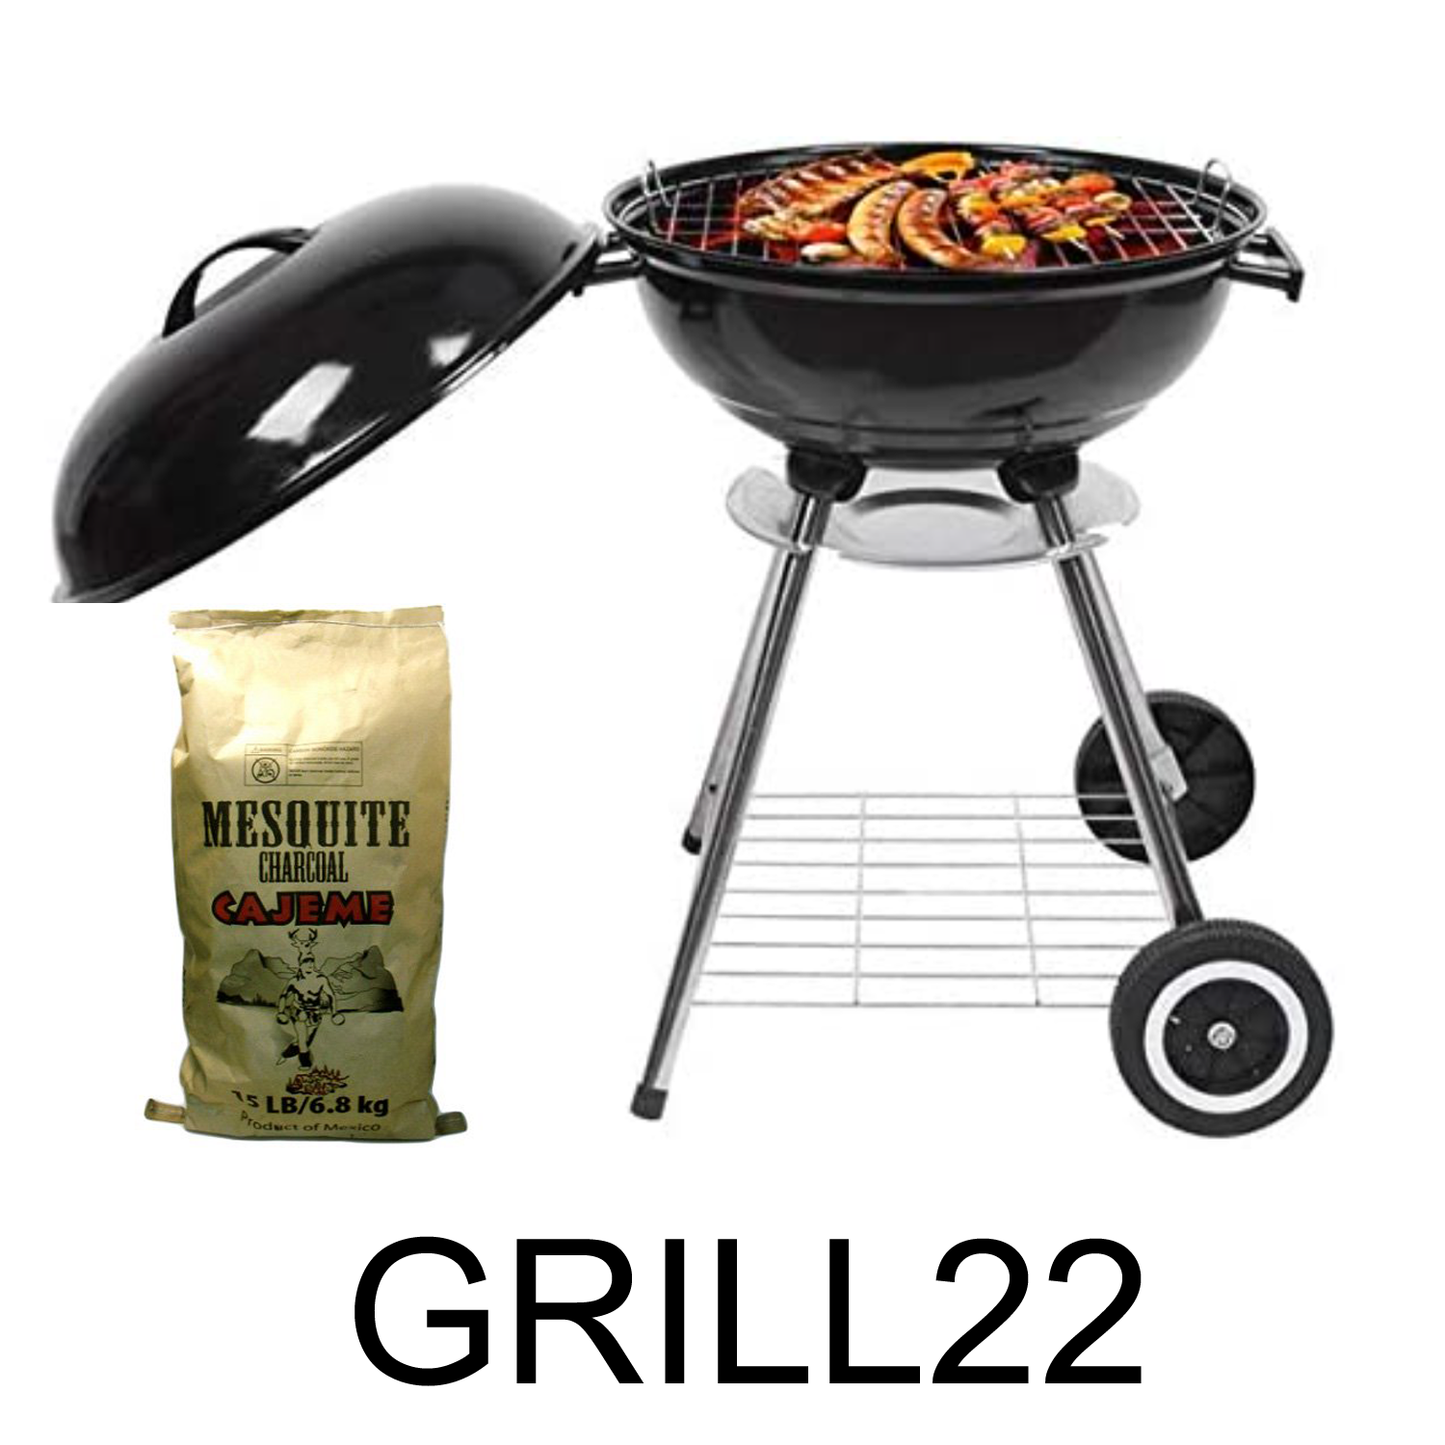 22" Round Portable BBQ Grill - Asador- Charcoal Grill